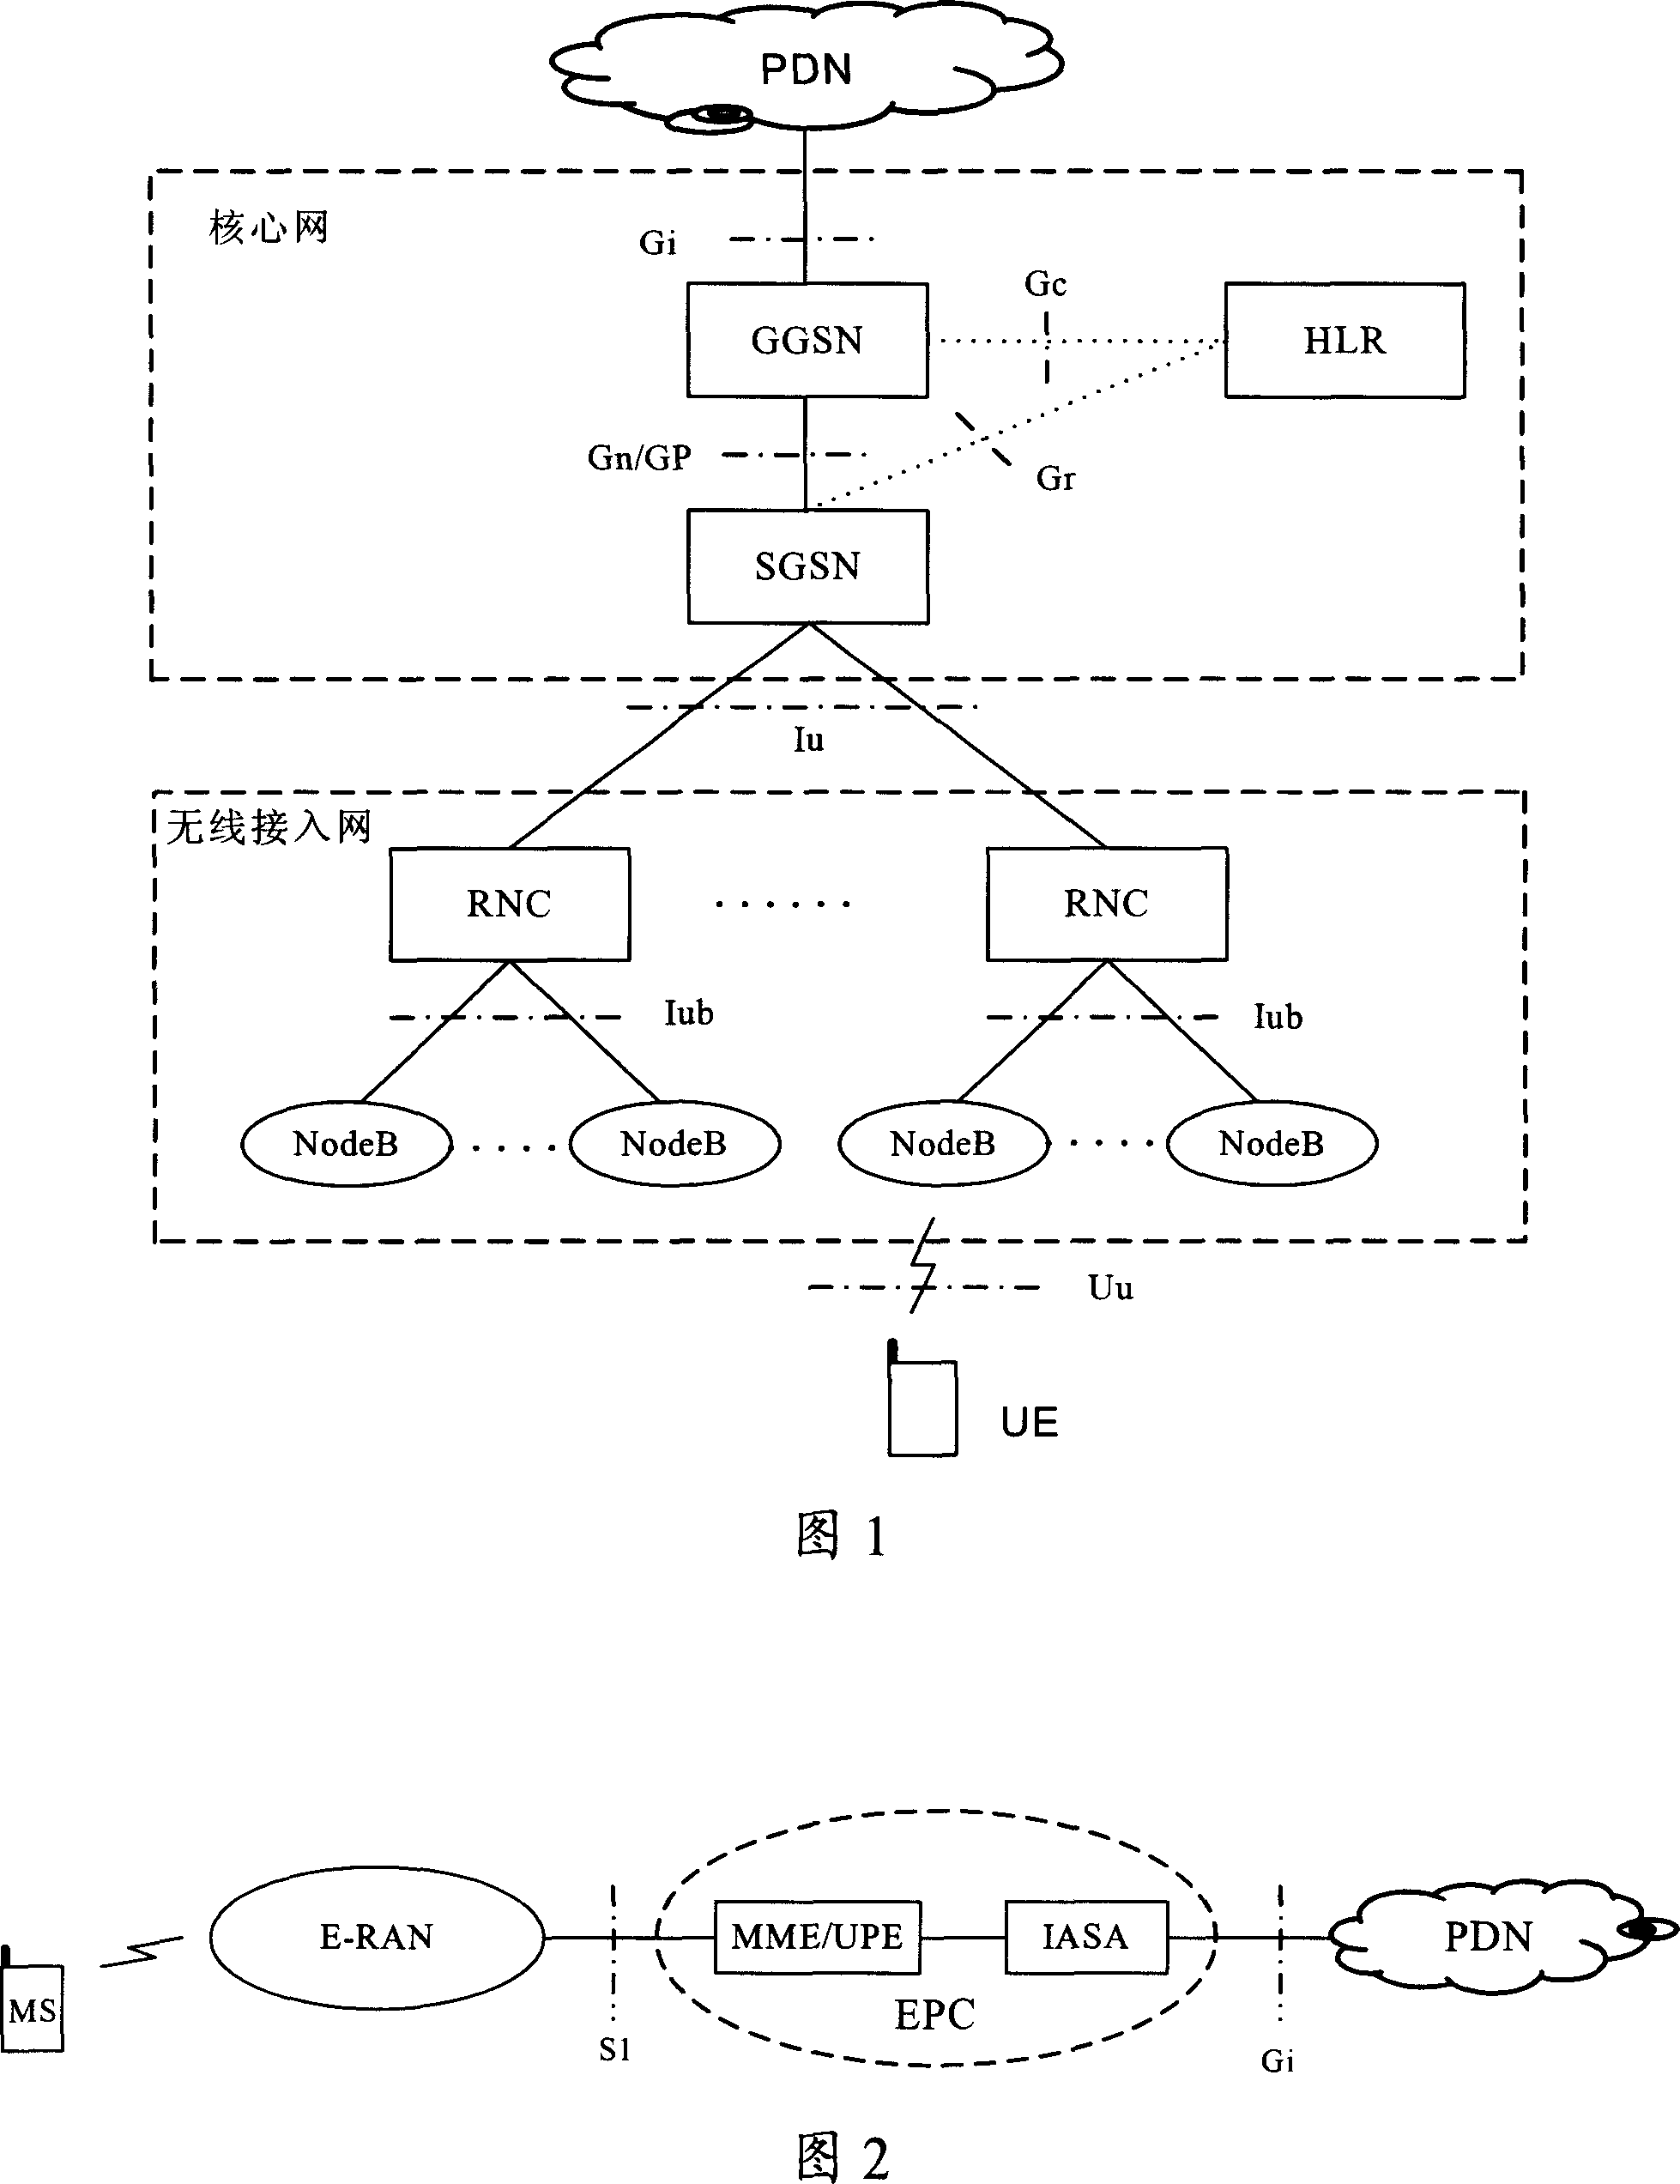 Method for transferring users among different core network equipments